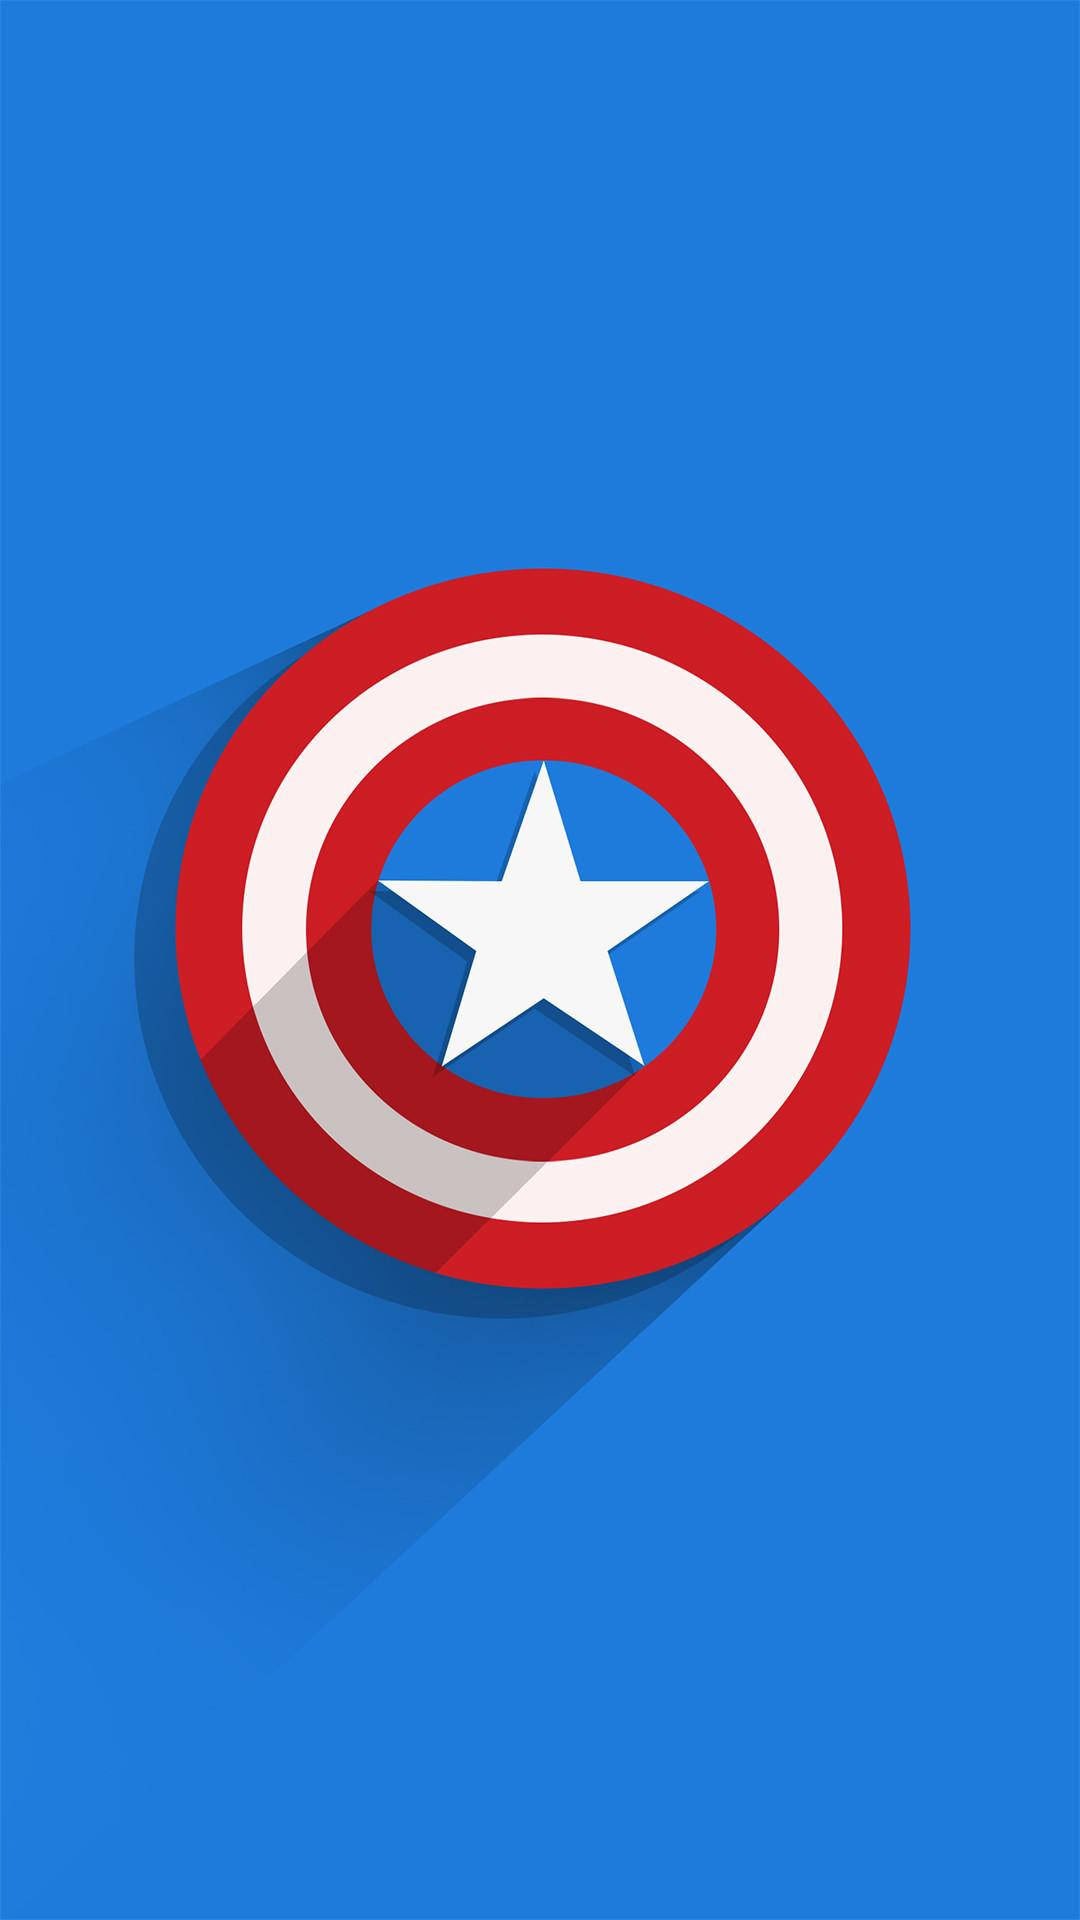 Captain America Shield iPhone Wallpapers  Top Free altimage  Captain  america shield wallpaper Captain america wallpaper Captain america logo